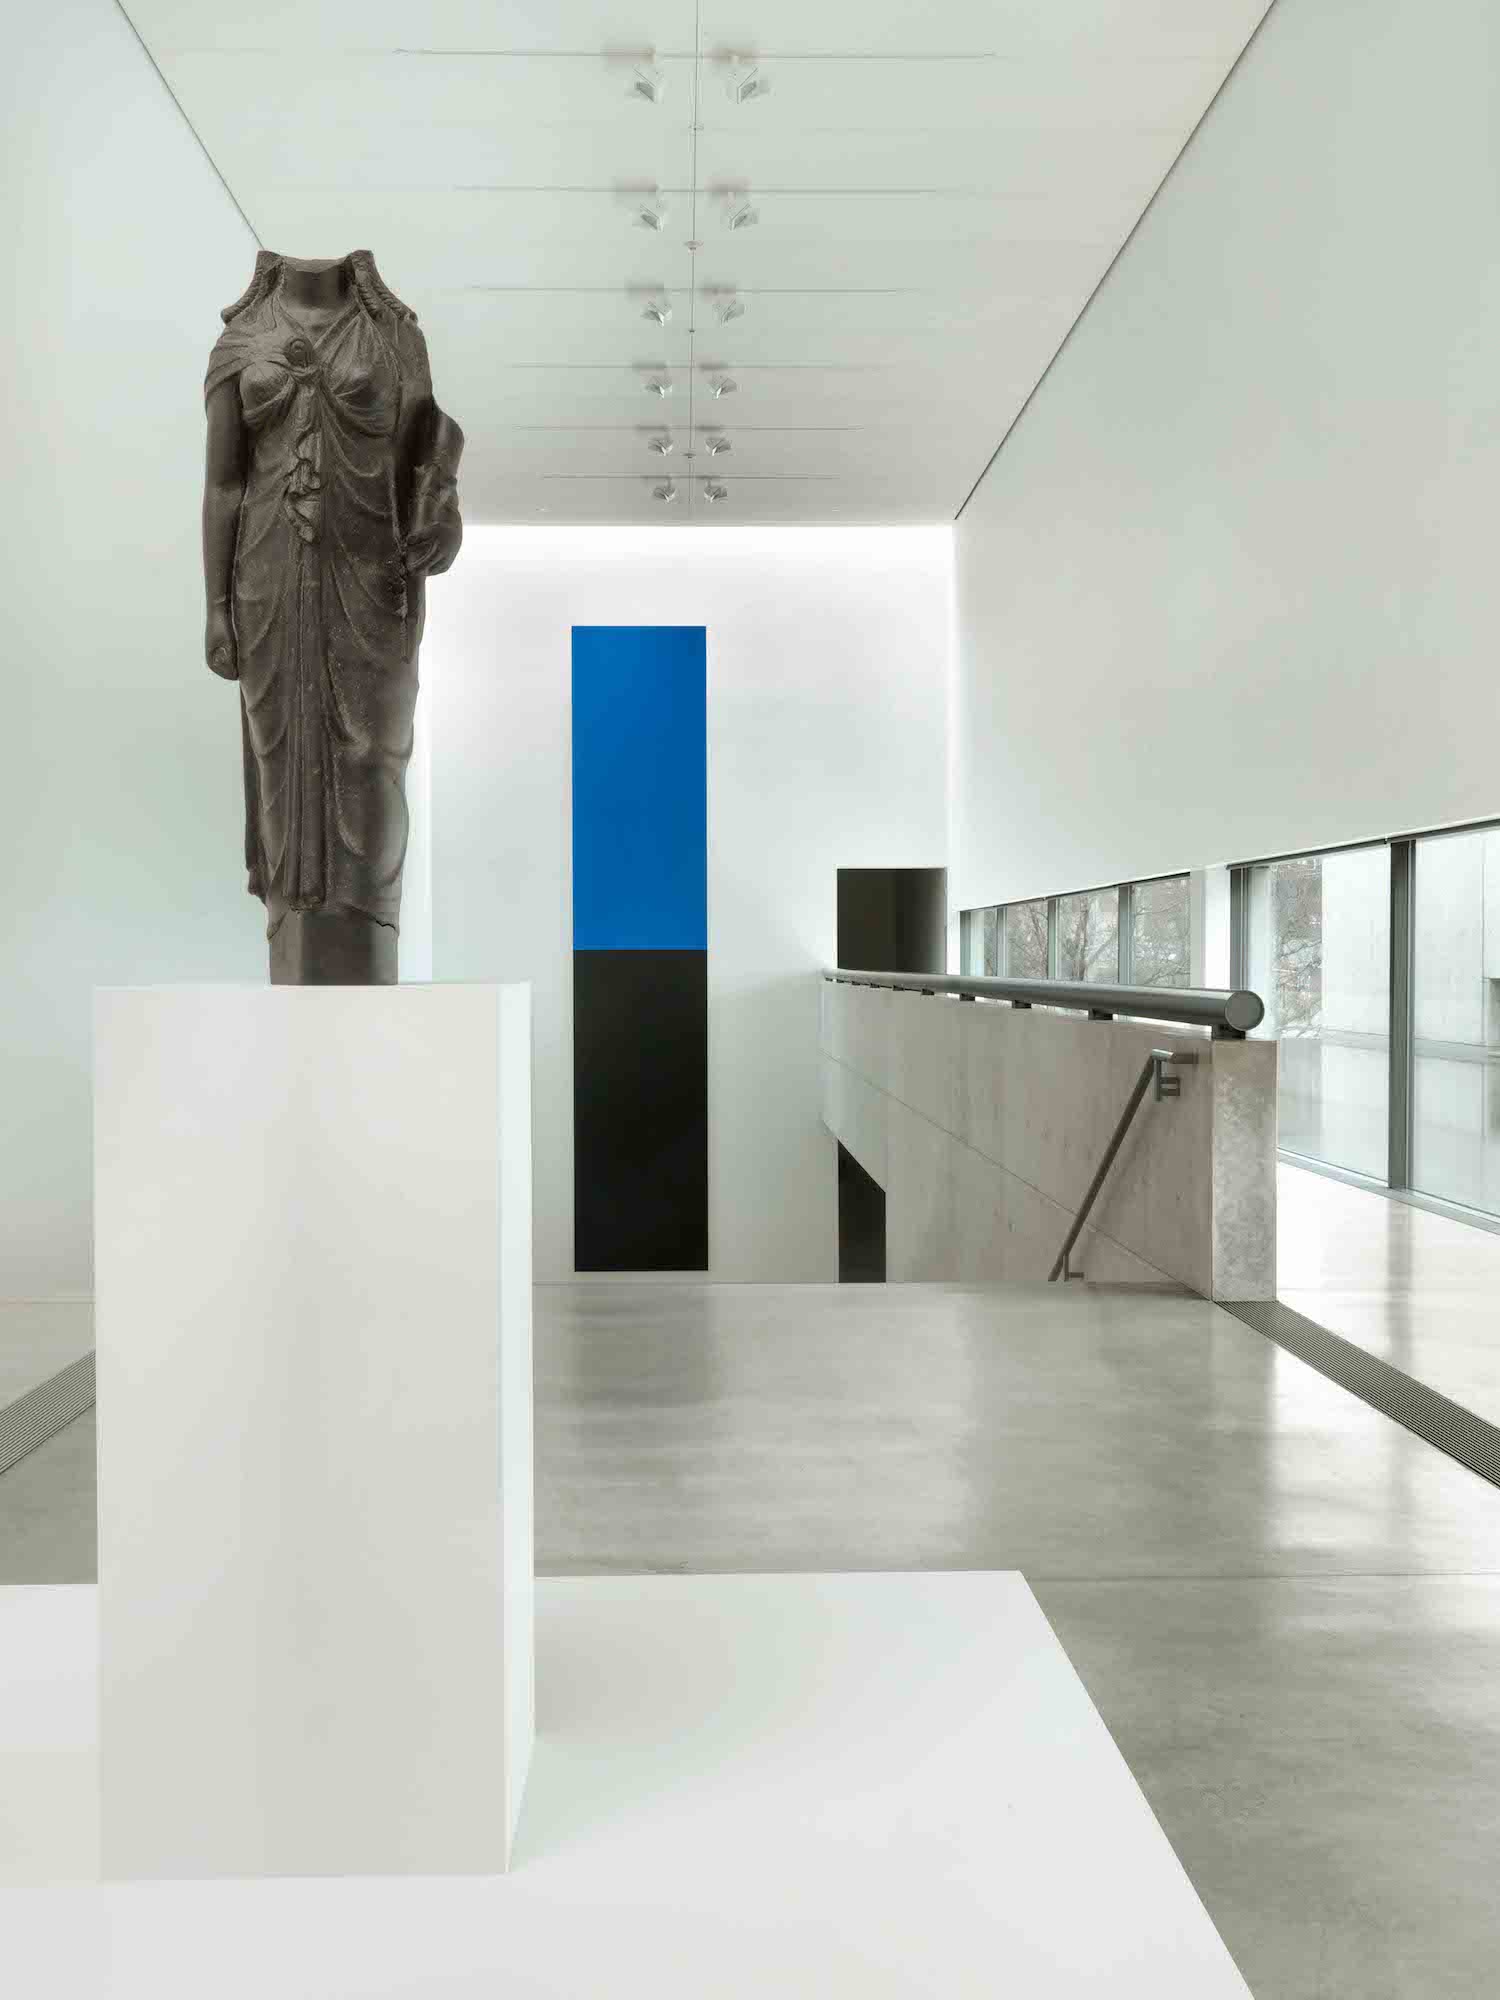 photo of a headless statue in a white gallery.